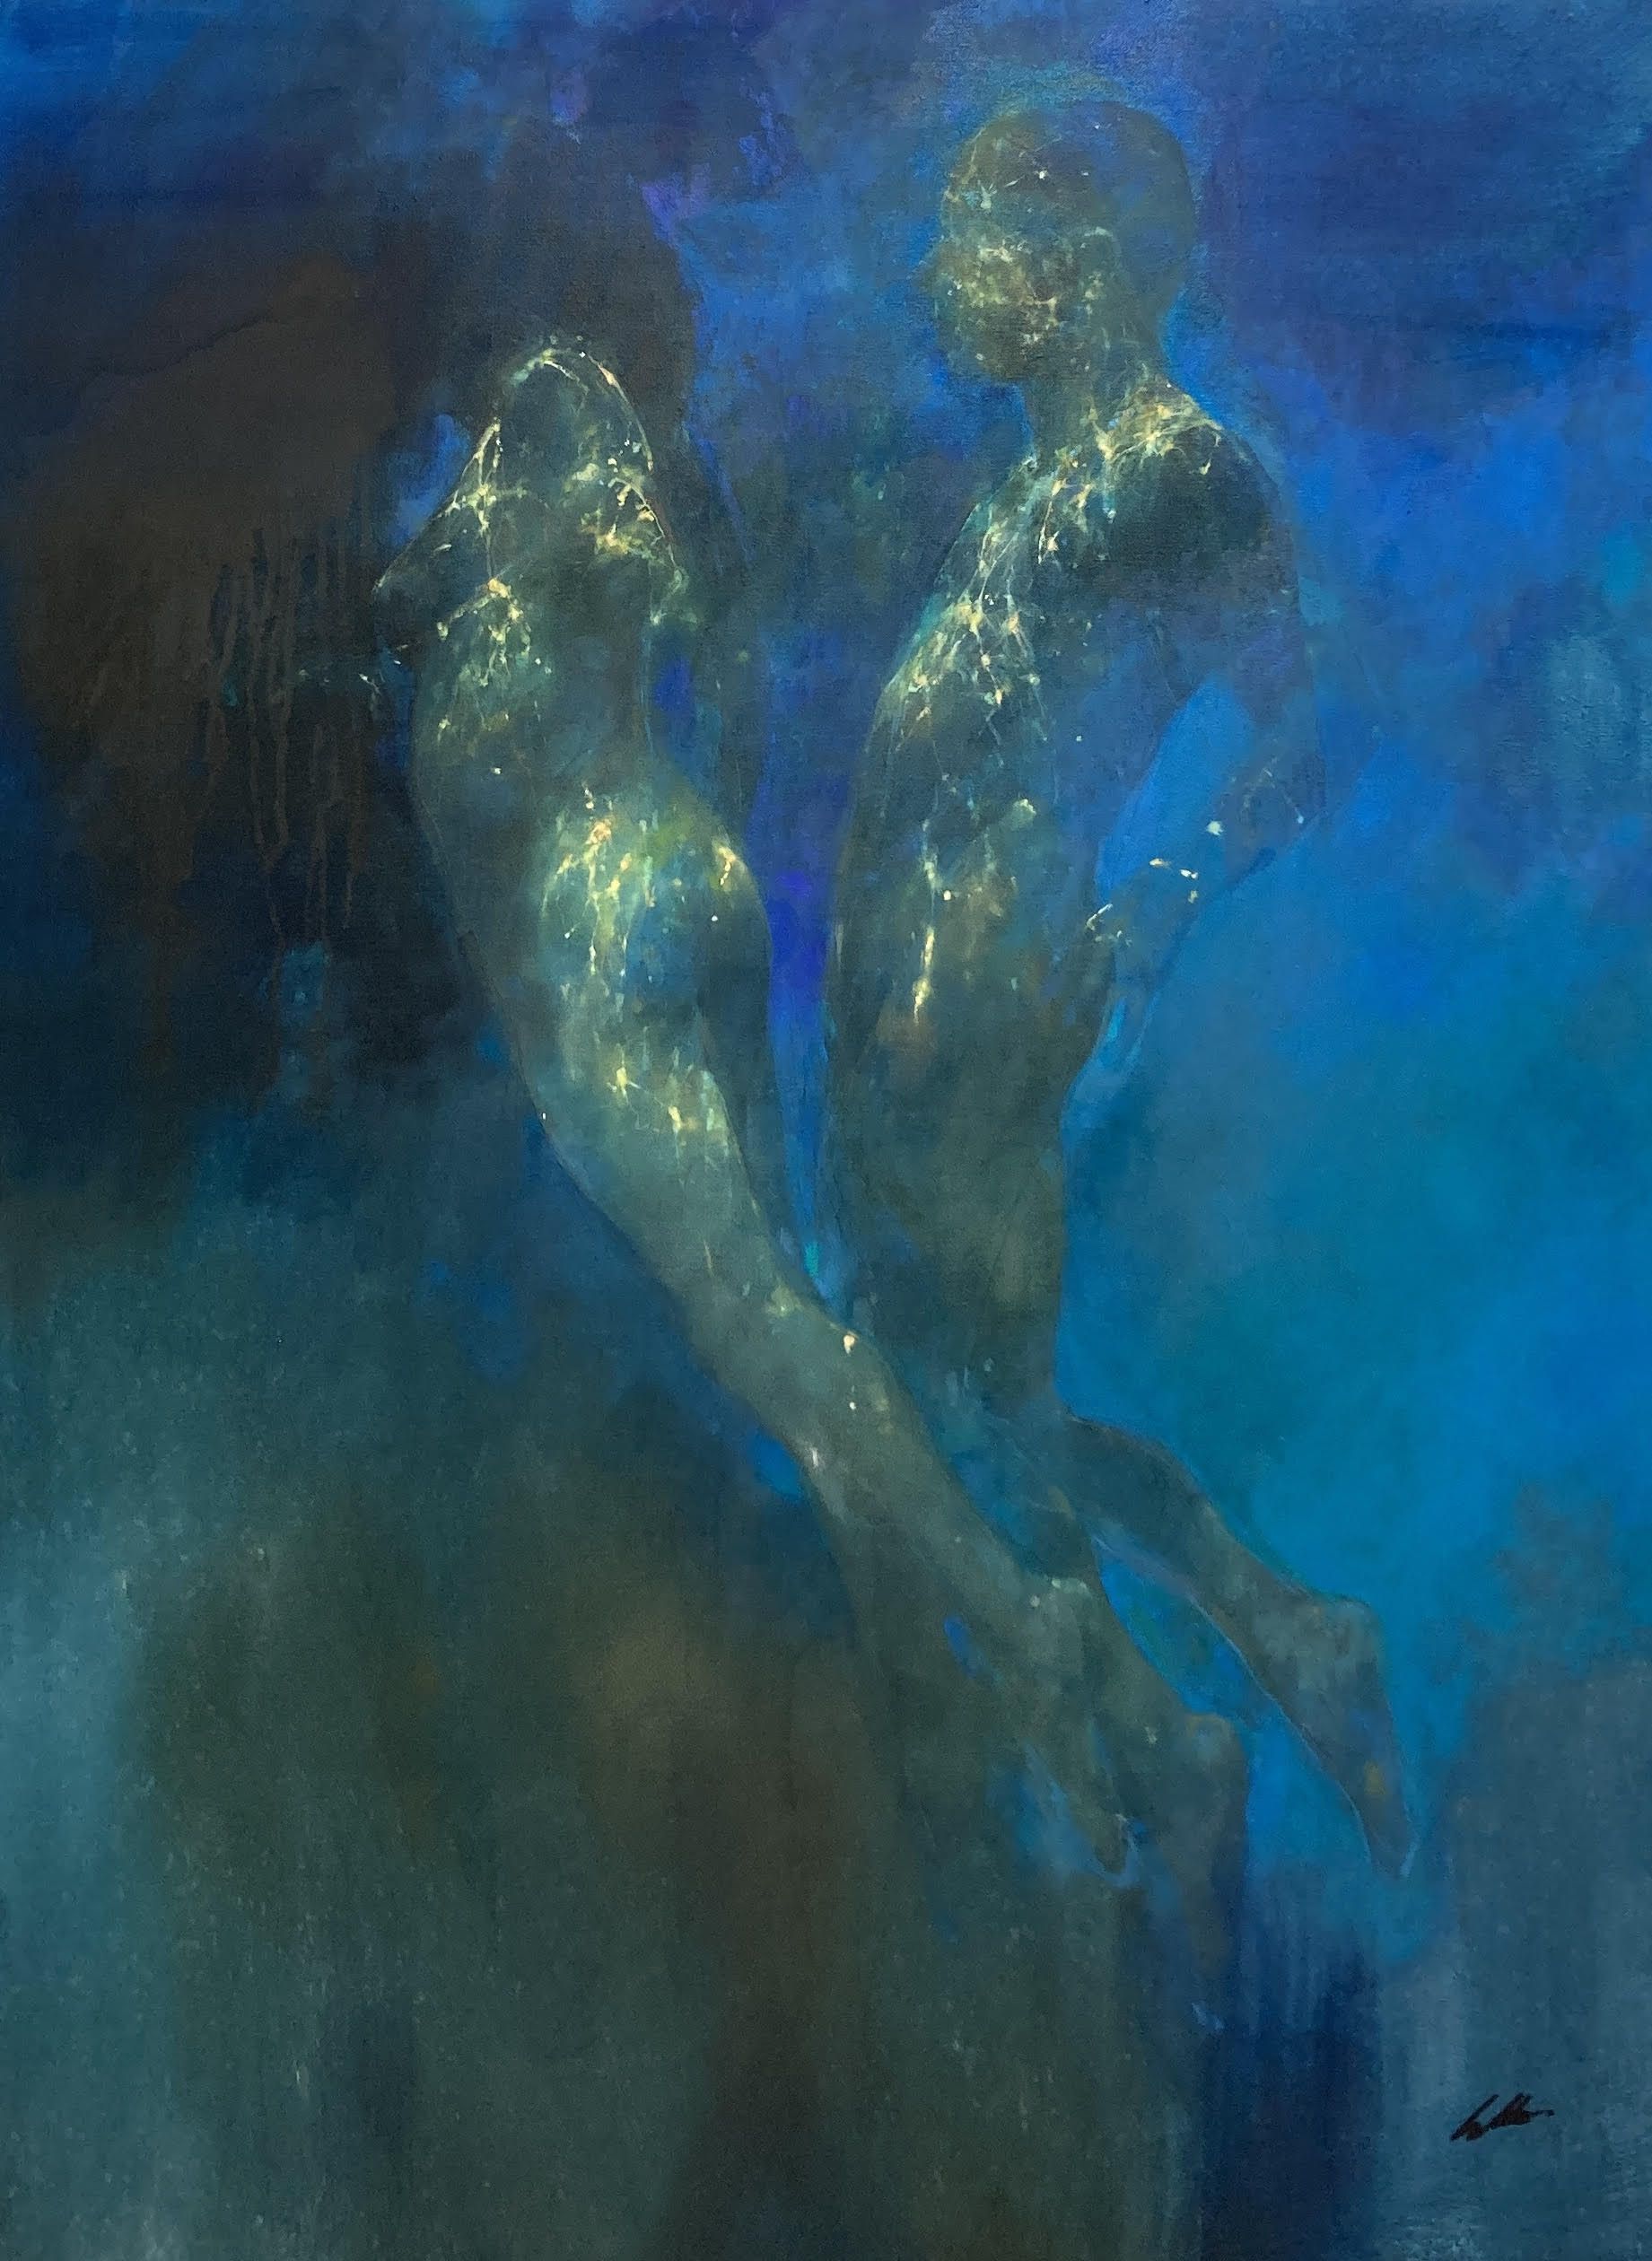 Reflections by Bill Bate